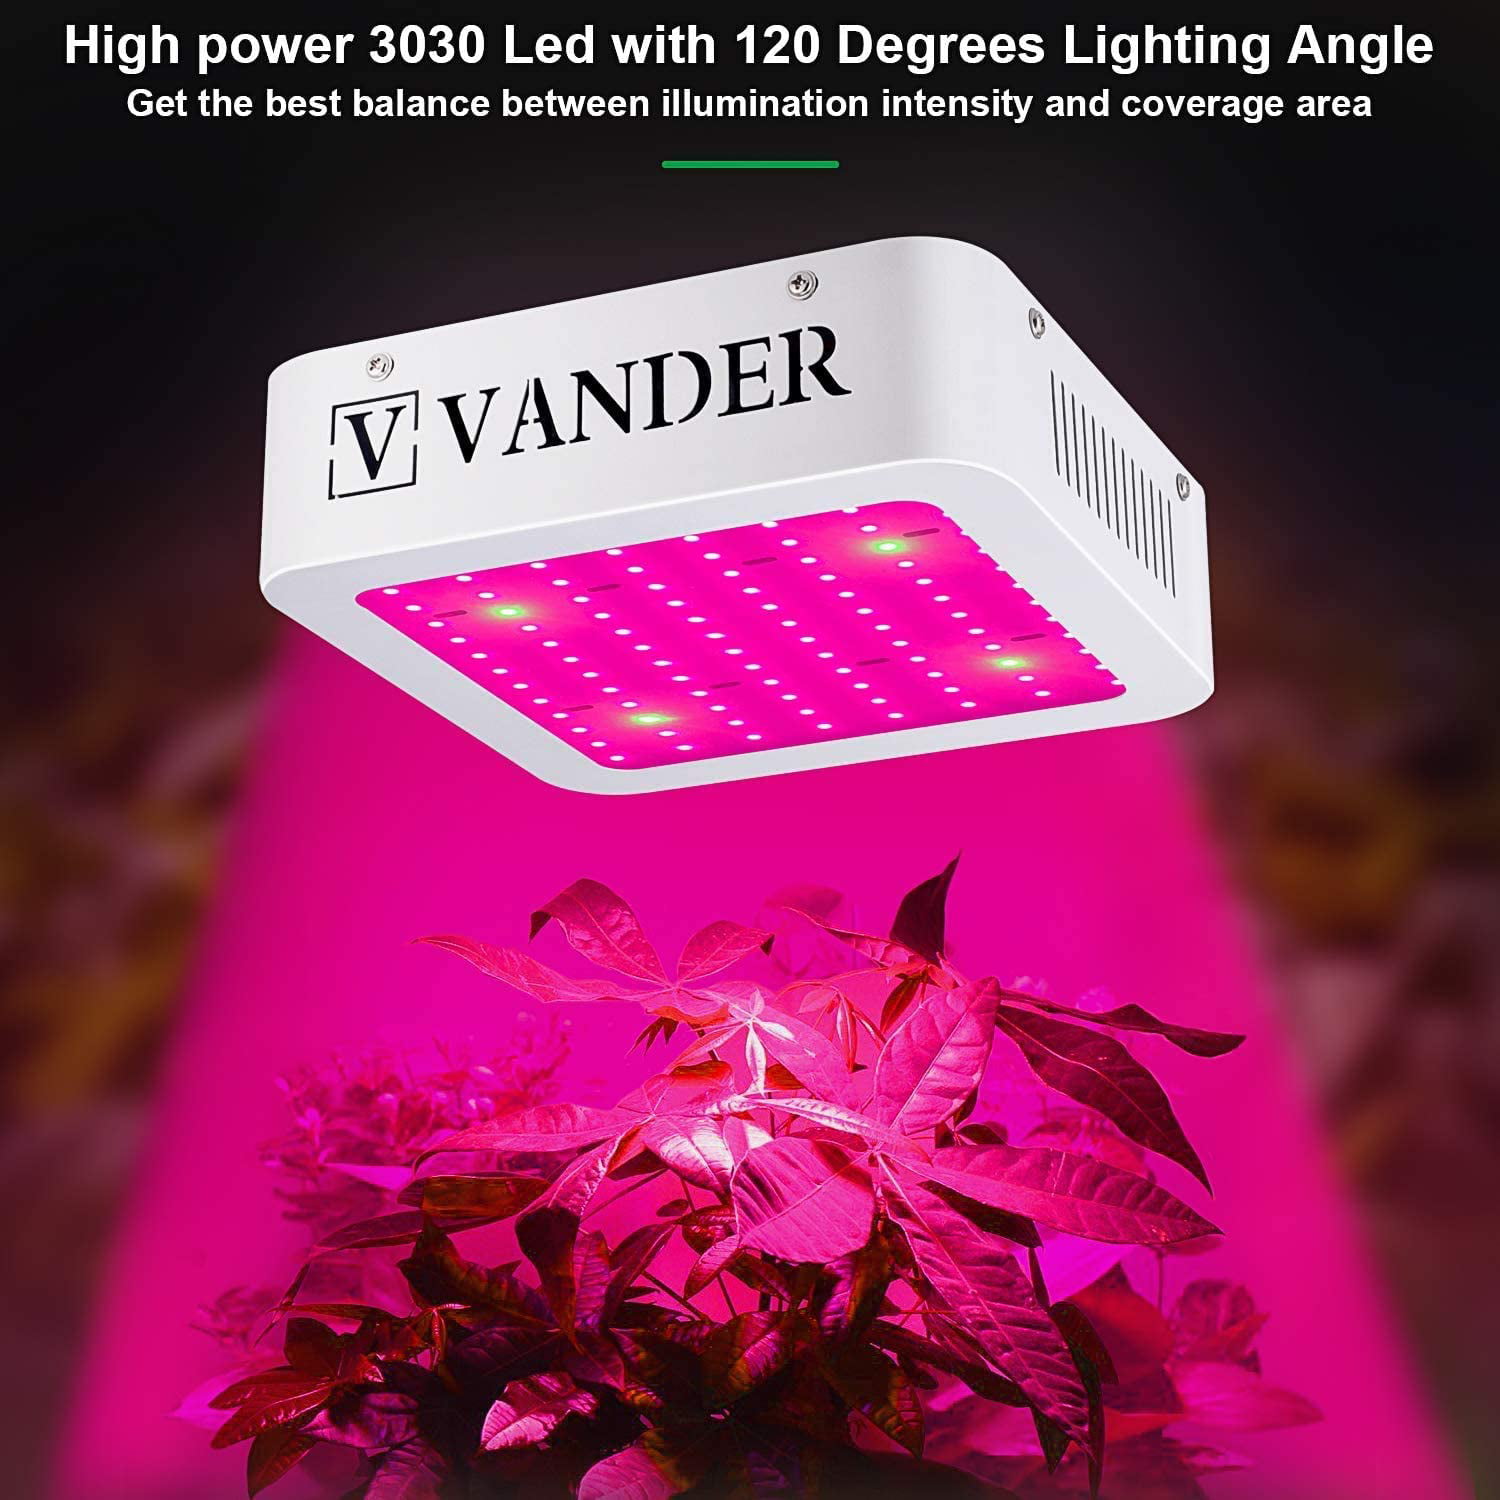 Myescustom Vander Upgraded 1000W LED Grow Light Double Switch Full Spectrum for Indoor Plants and Flower LED Grow Lamp with Daisy Chain Double-Chips LED (10W LED100 pcs) - Walmart.com